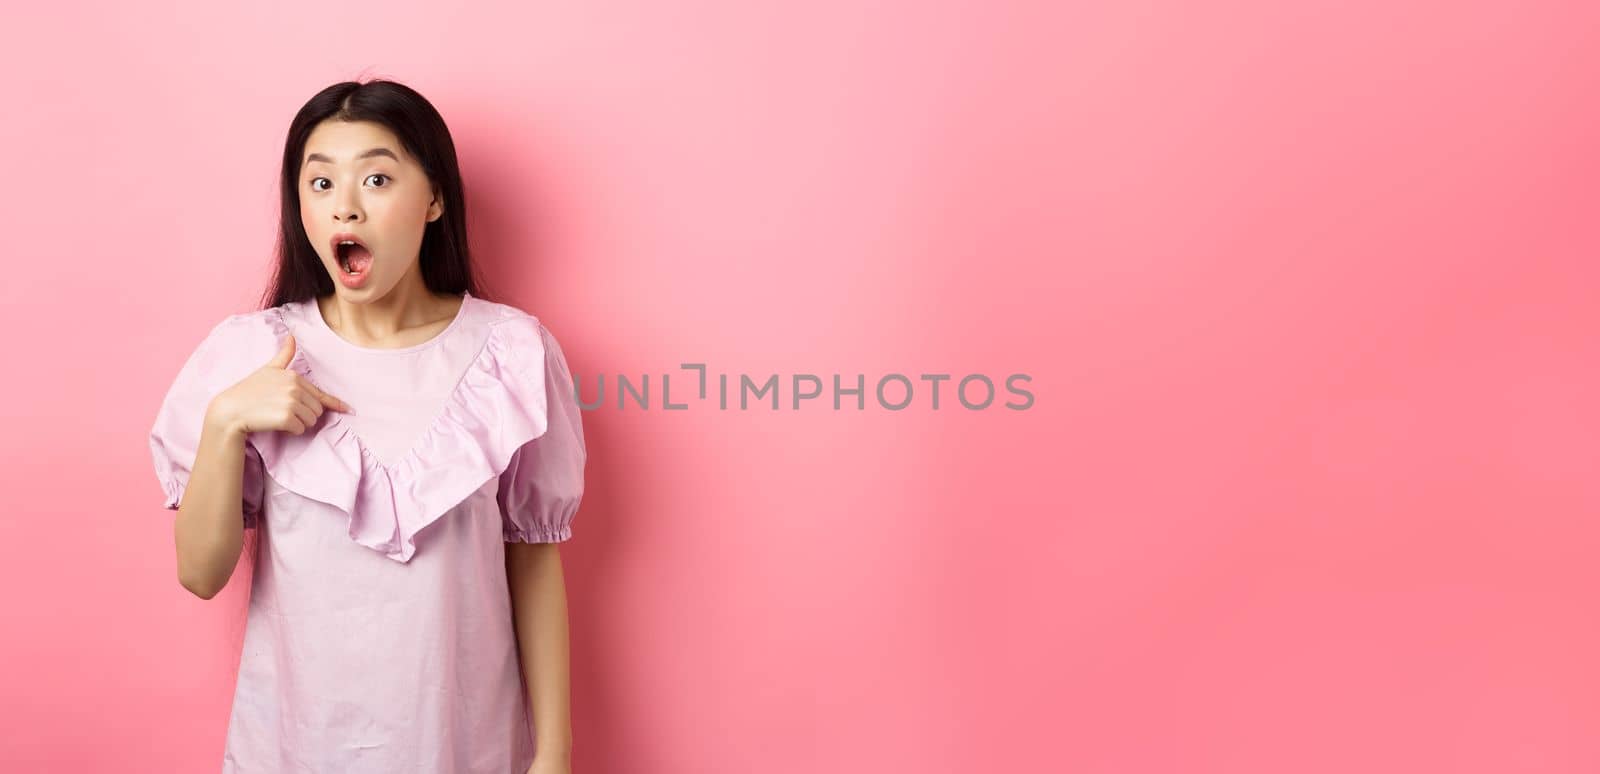 Surprised asian girl gasping wondered, pointing at herself, being chosen or picked, standing in dress against pink background.